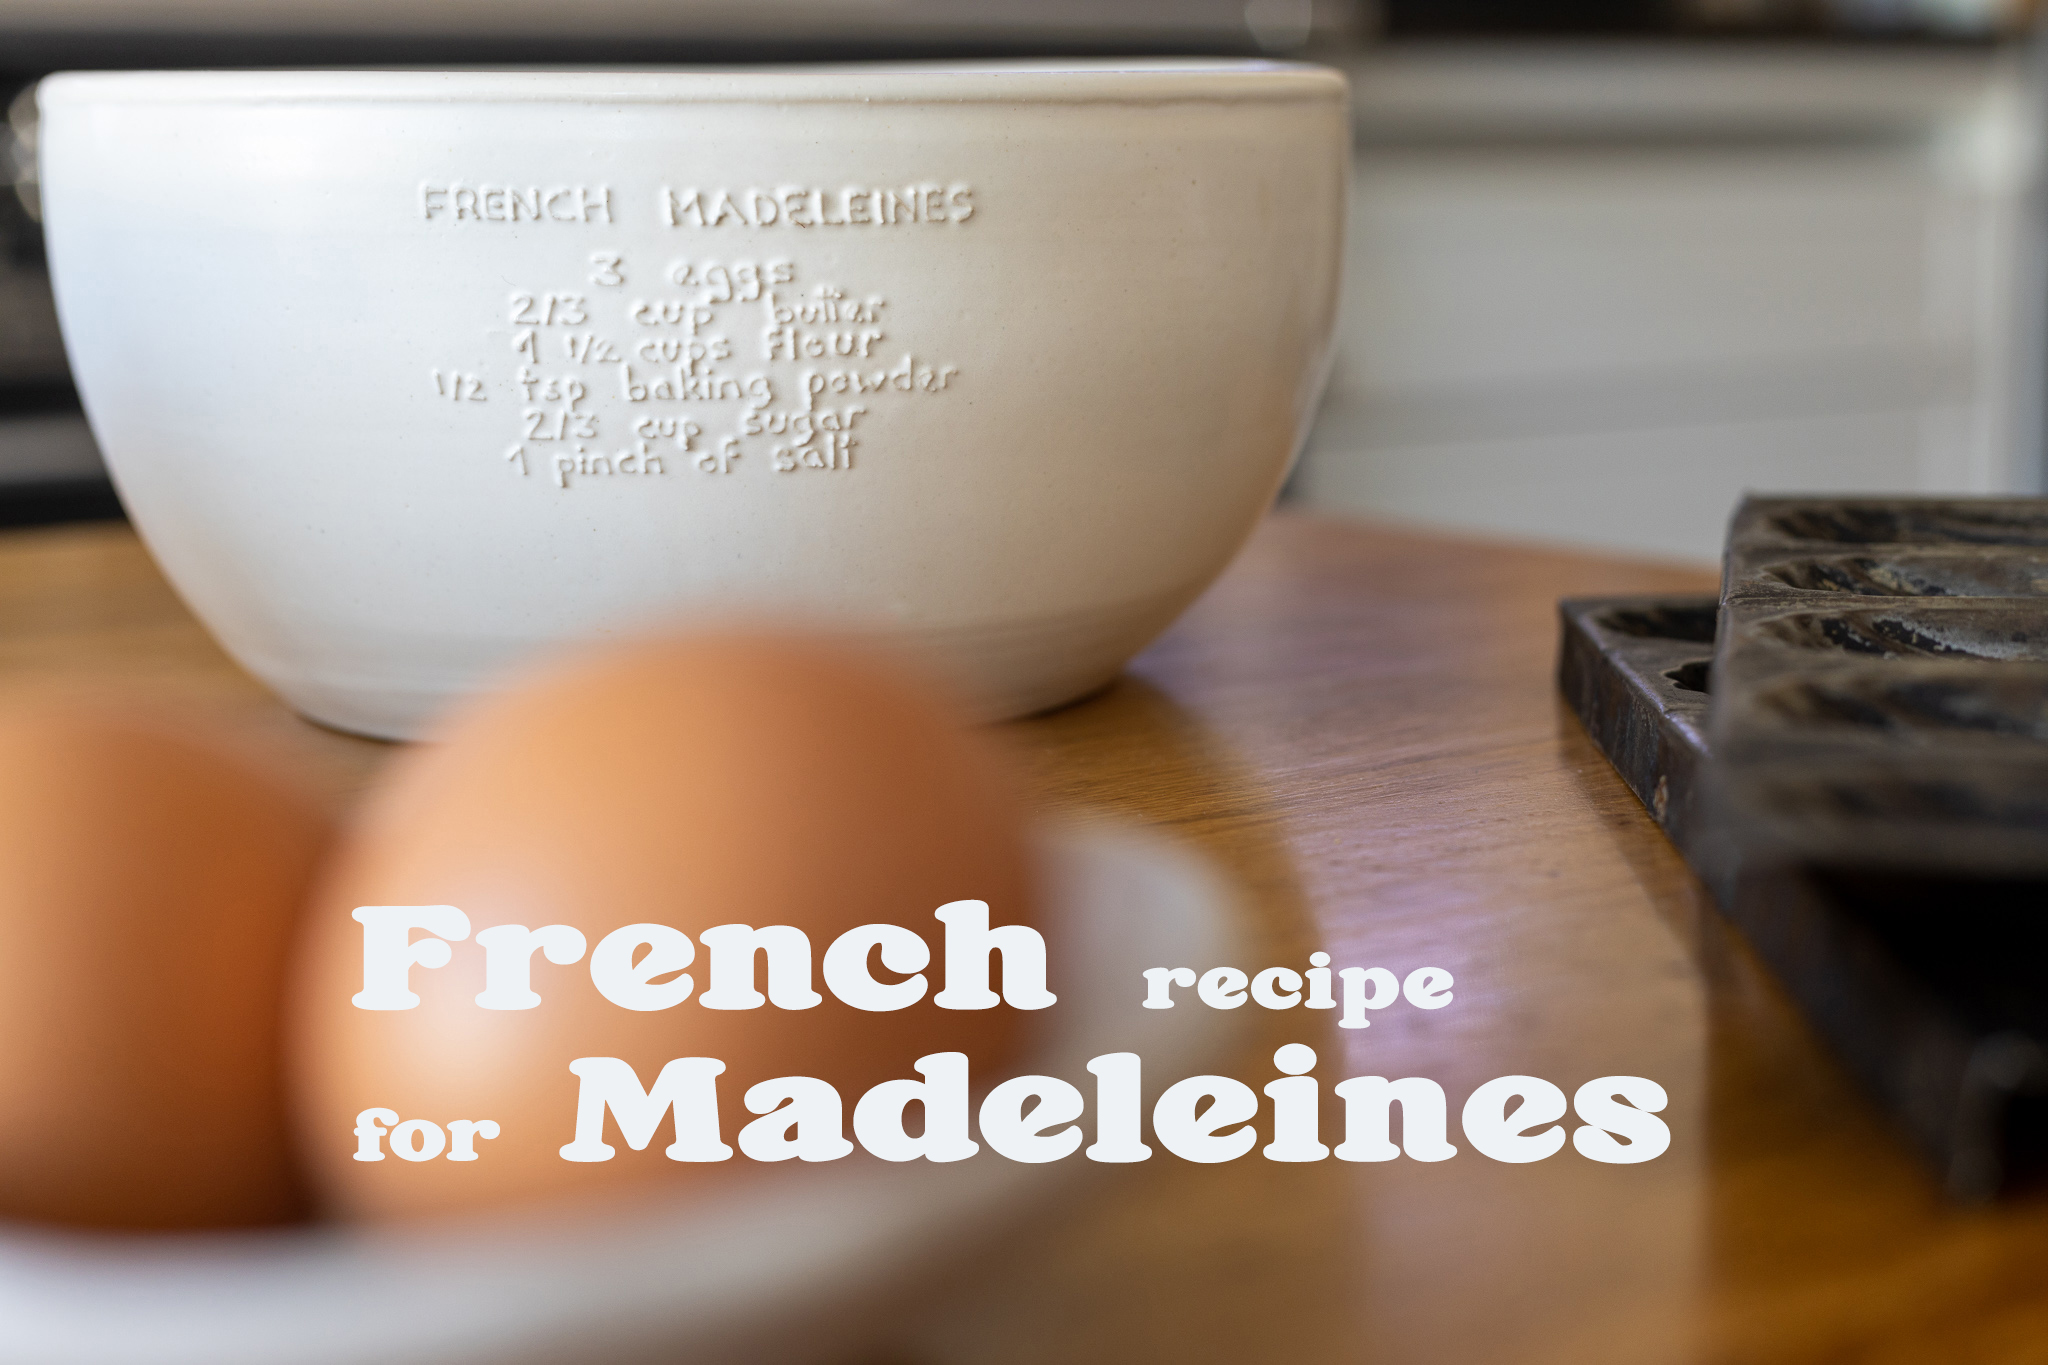 French recipe for madeleines